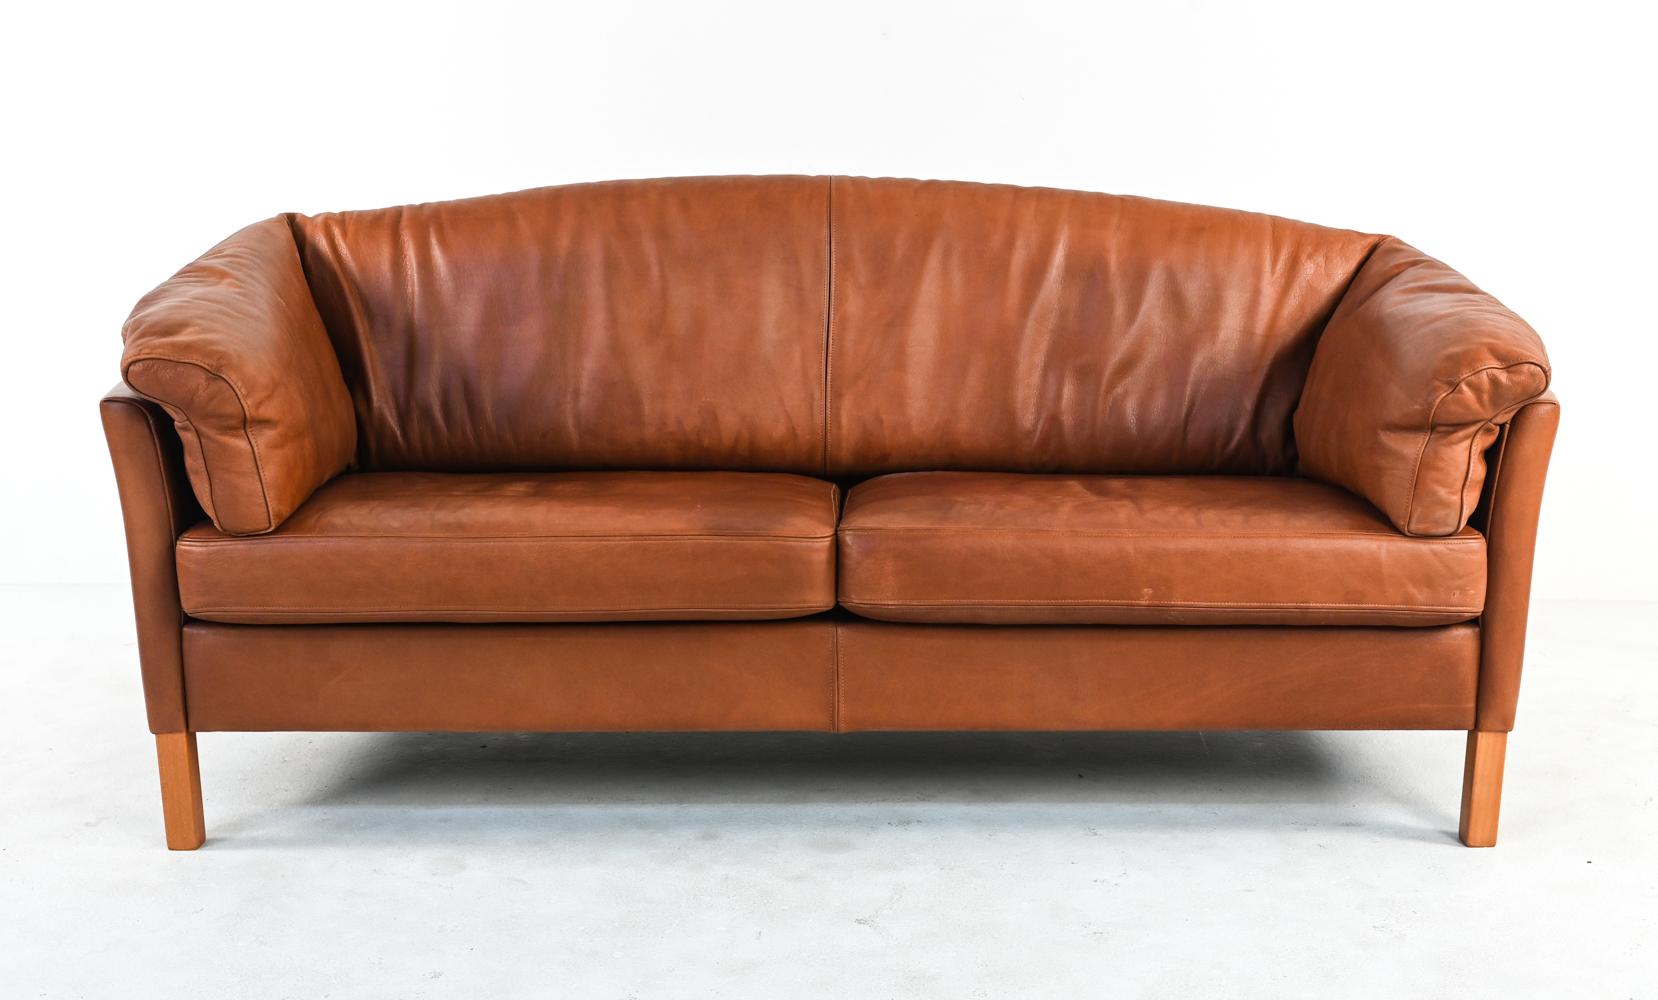 This iconic model 535 two-seat sofa by Mogens Hansen features slightly bowed shelter arms and comfortable plush cushions atop sturdy natural beech wood legs. The upholstery is a handsomely patinated tan leather - reminiscent of an English saddle -